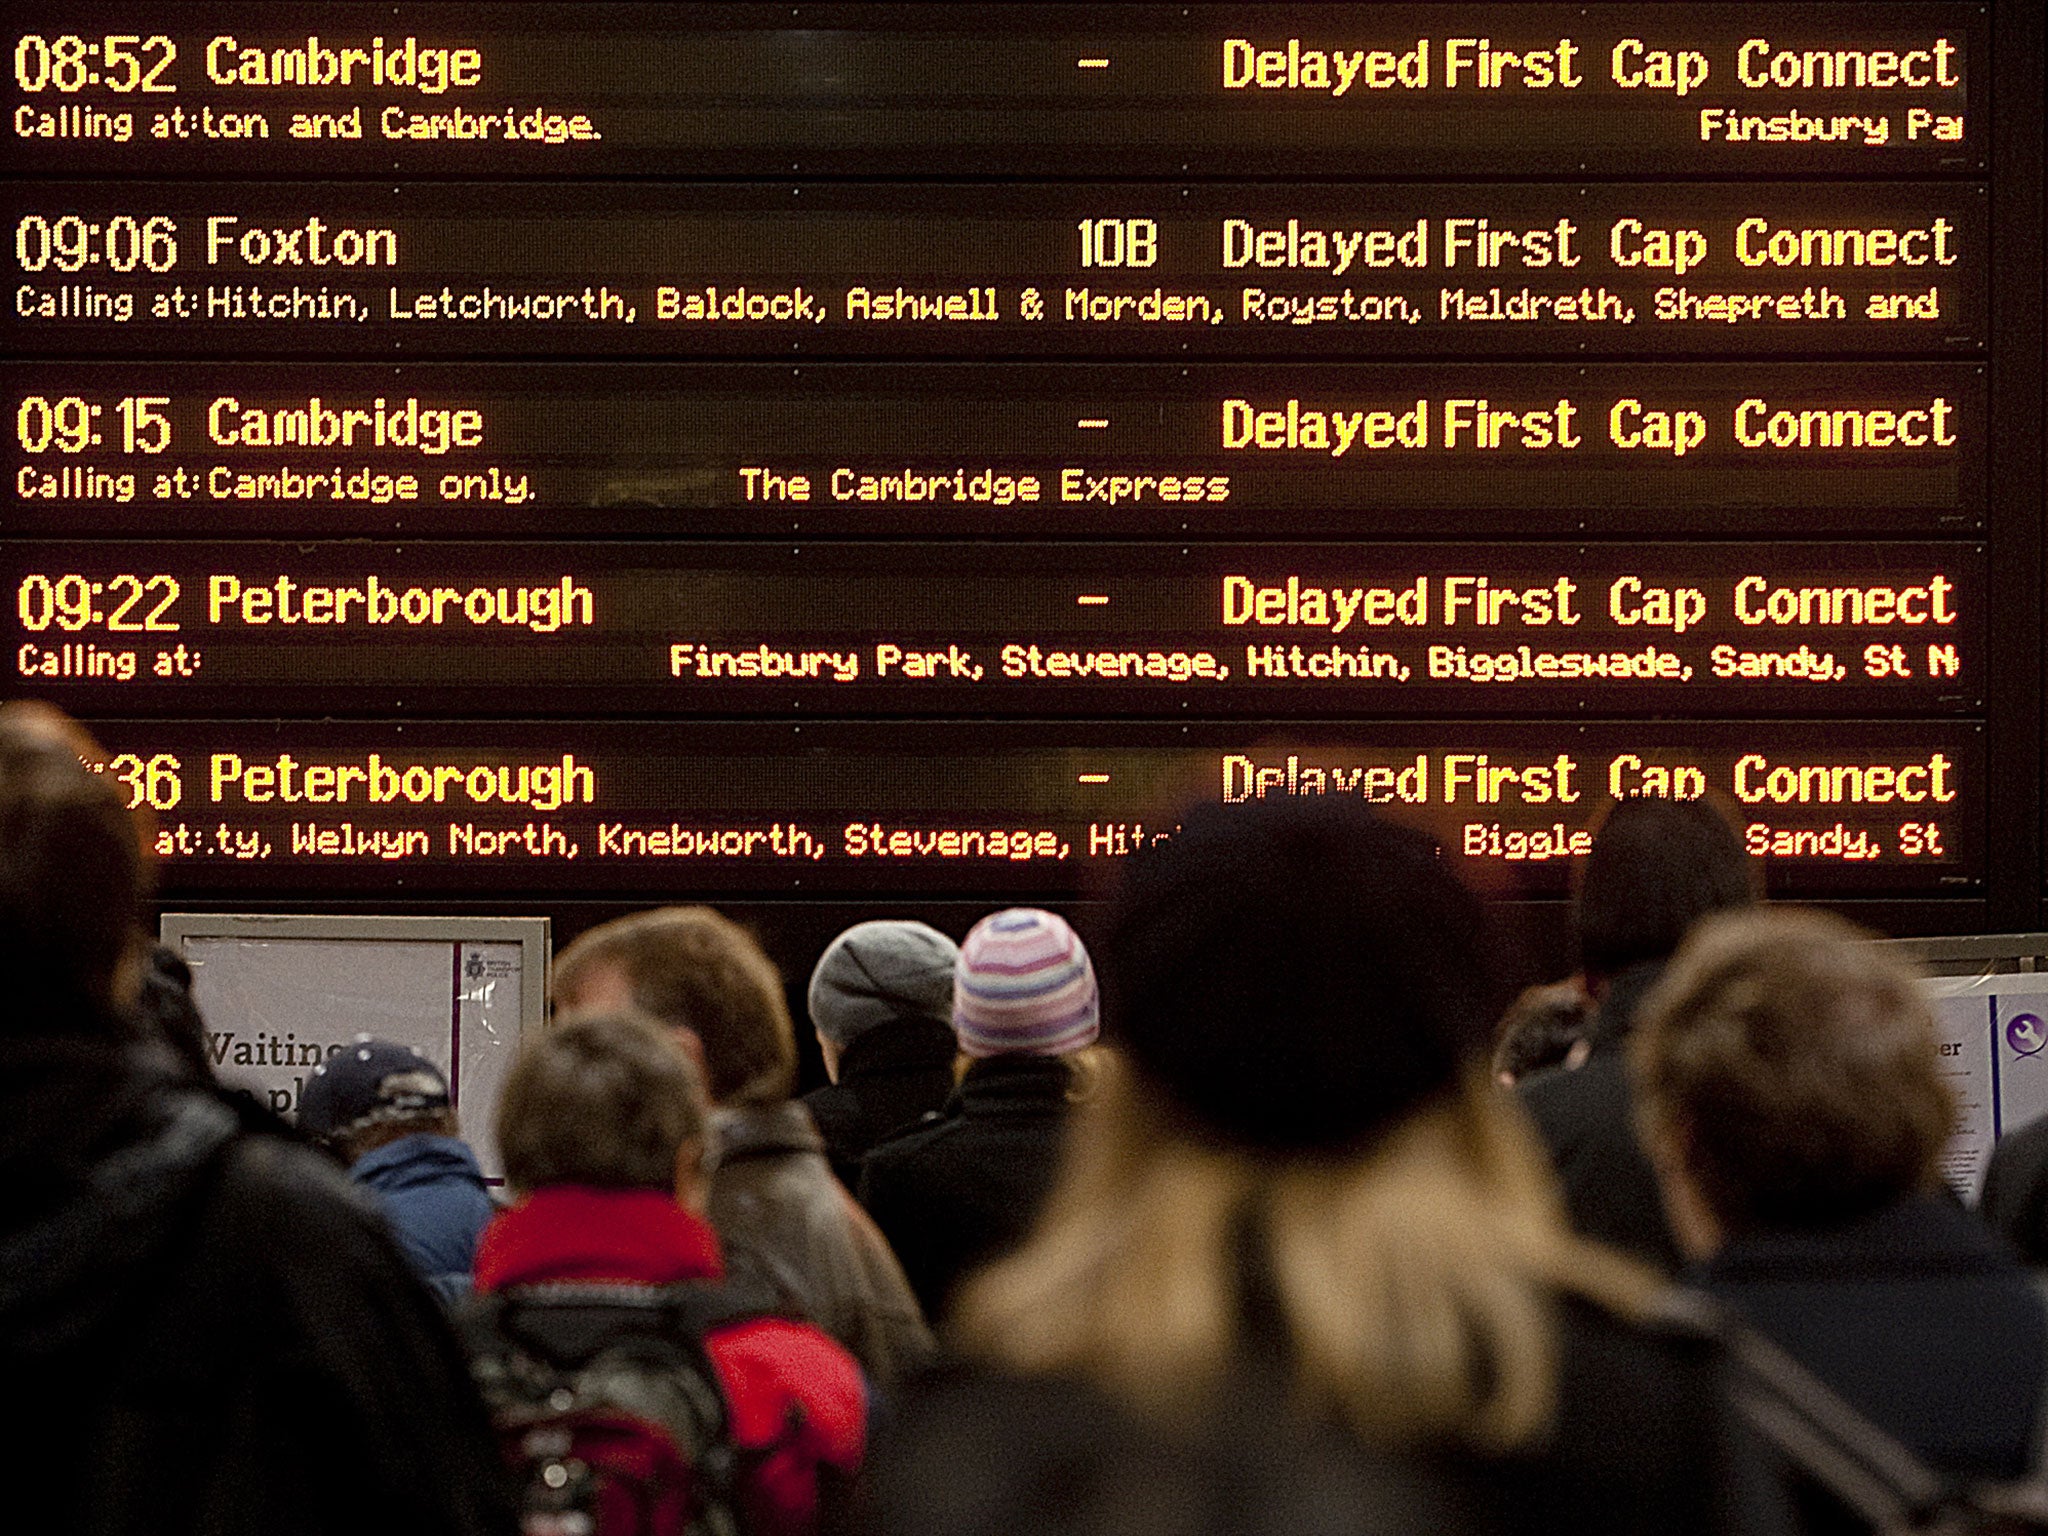 Rail passengers look at the departures screen in Kings Cross station in London, as trains are delayed on December 18, 2009